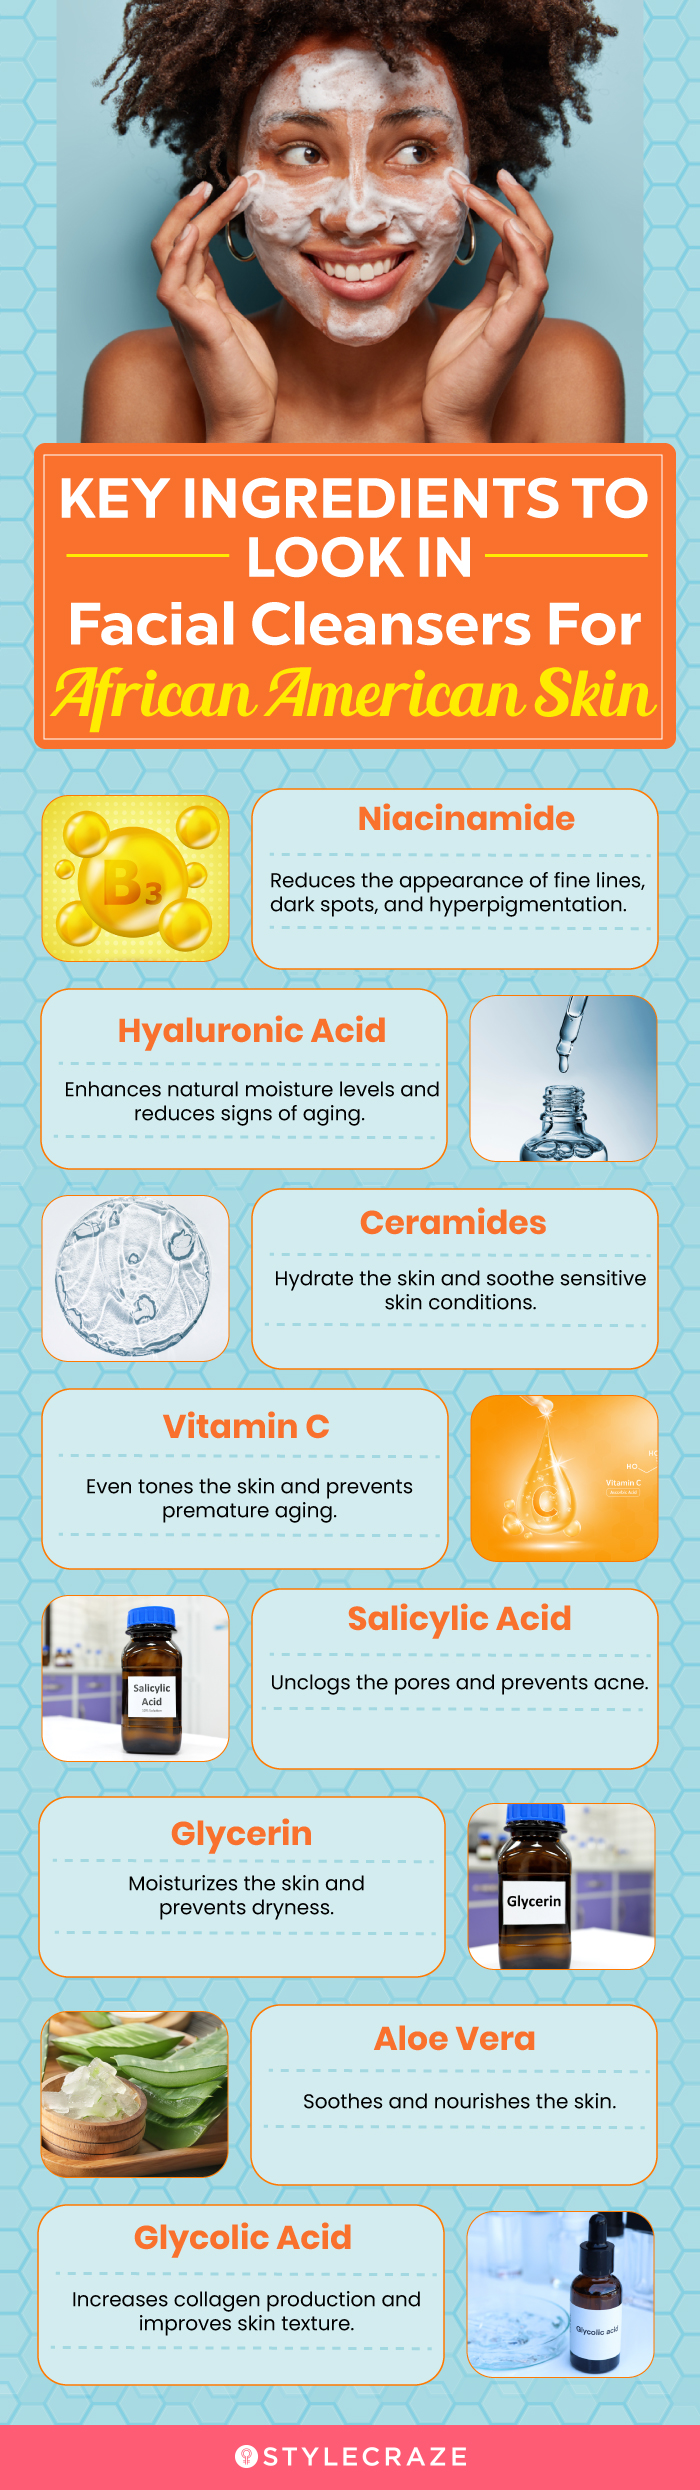 Key Ingredients To Look In Facial Cleansers For African American Skin(infographic)